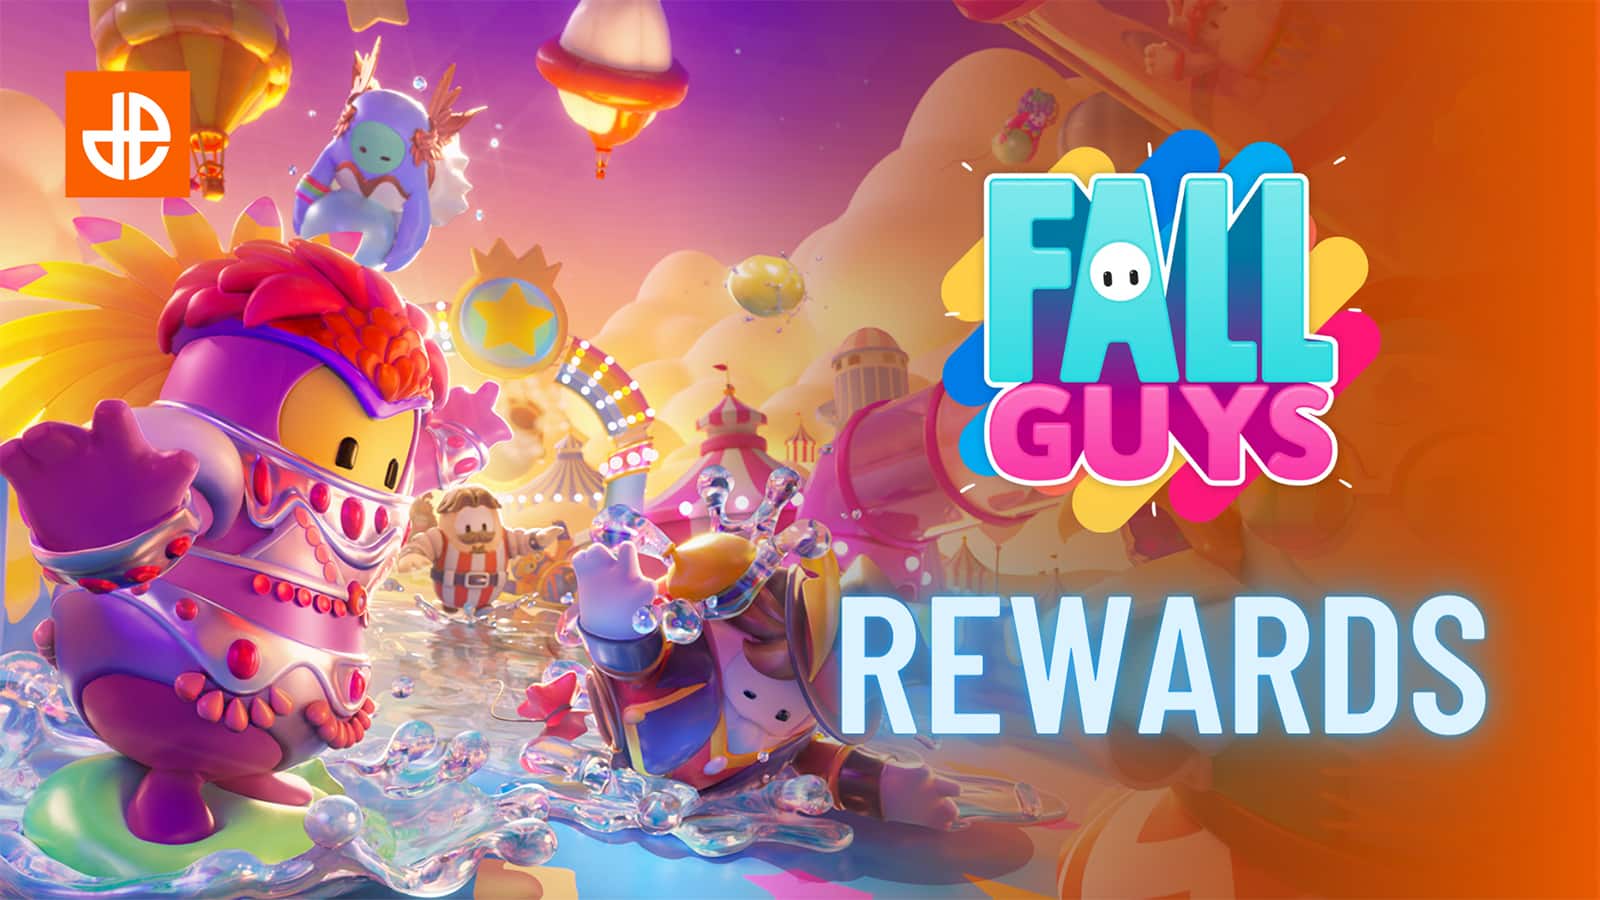 A poster for Fall Guys Prime Gaming rewards